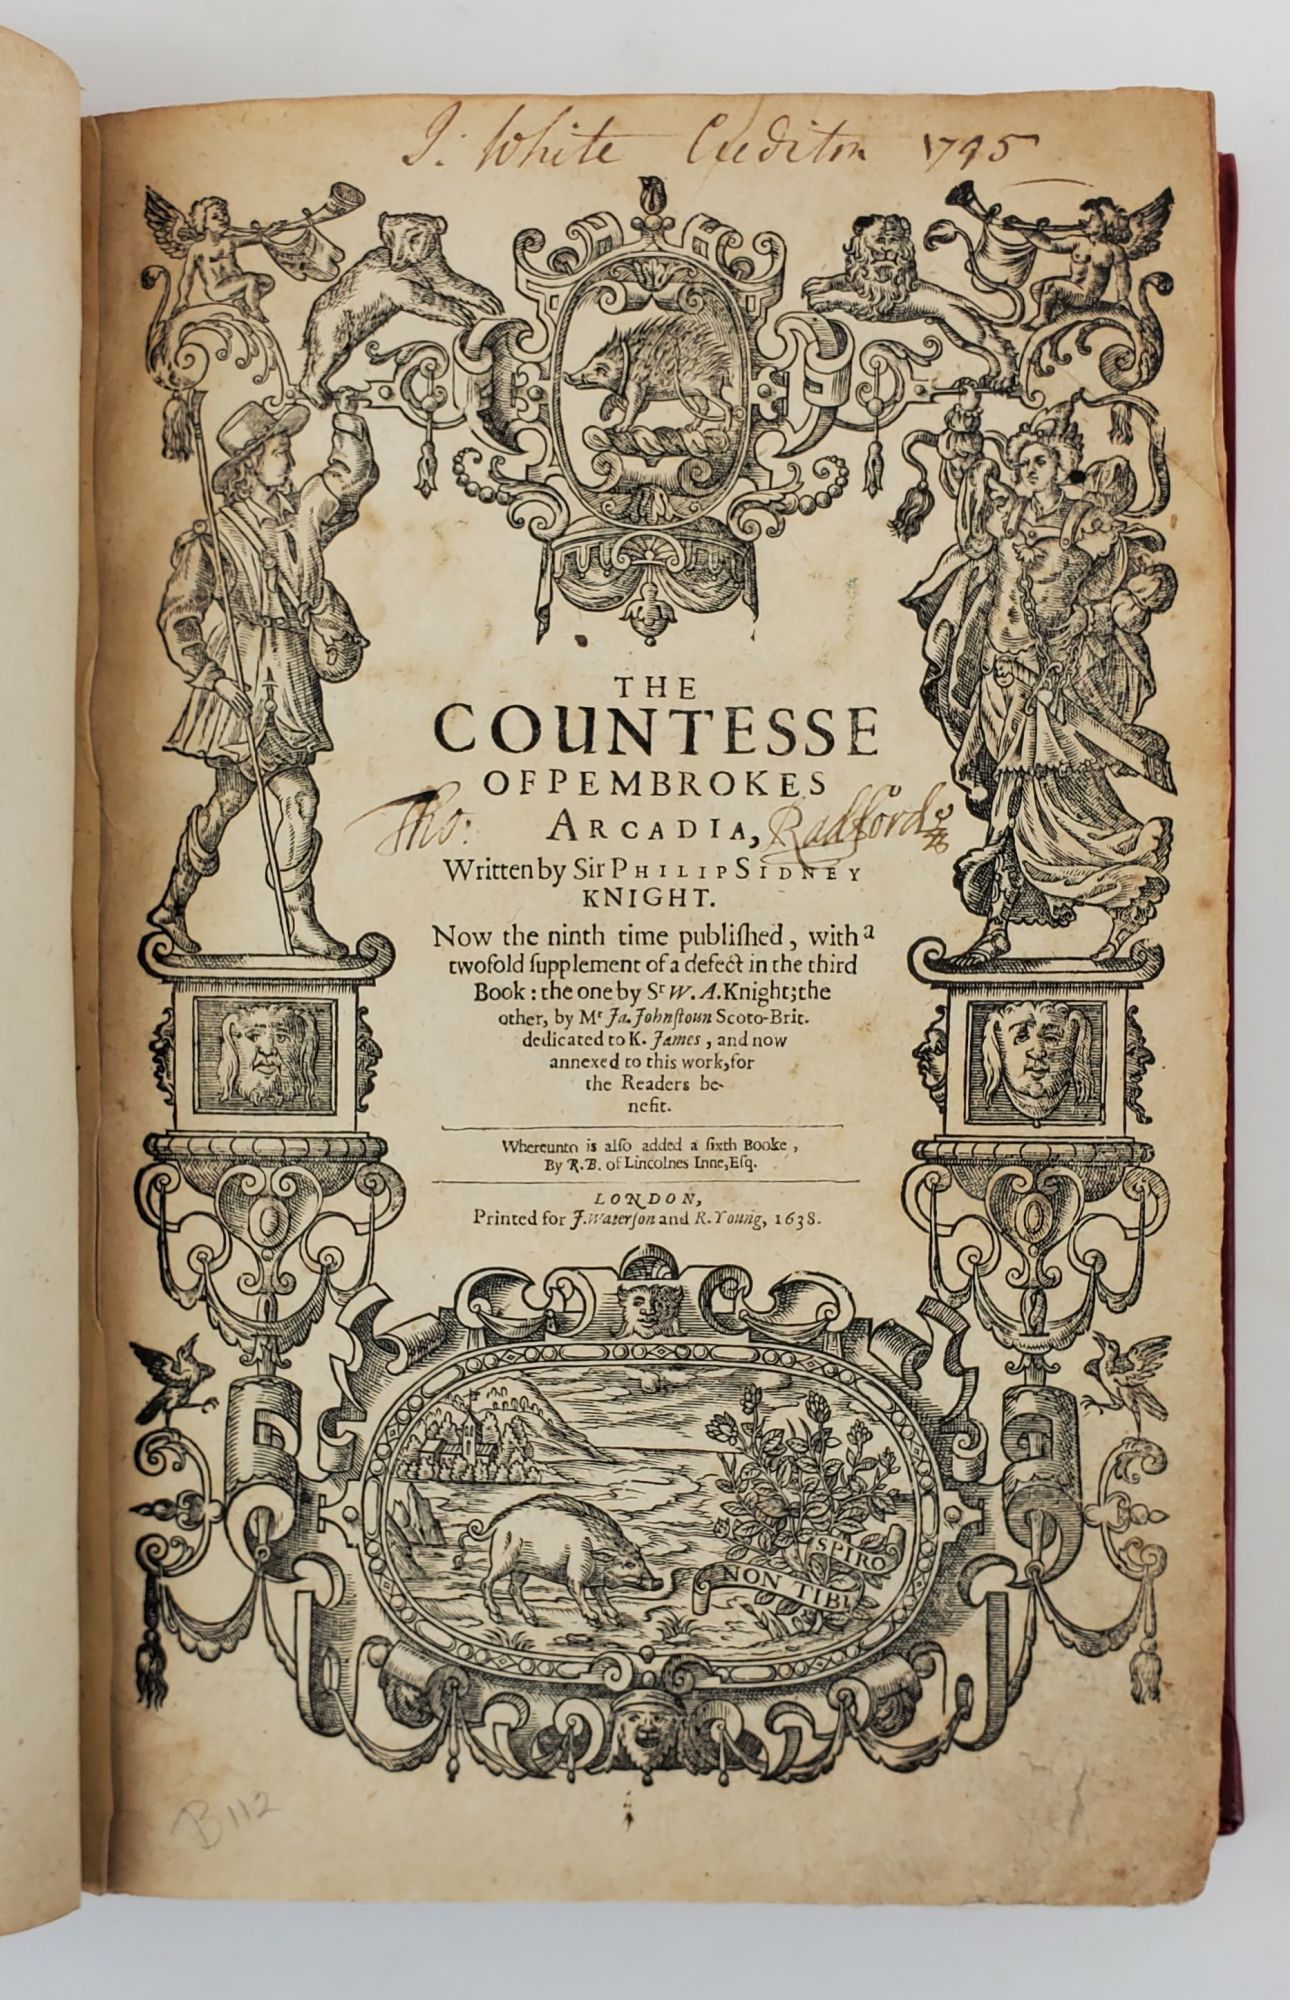 Product Image for THE COUNTESSE OF PEMBROKES ARCADIA, WRITTEN BY SIR PHILIP SIDNEY KNIGHT